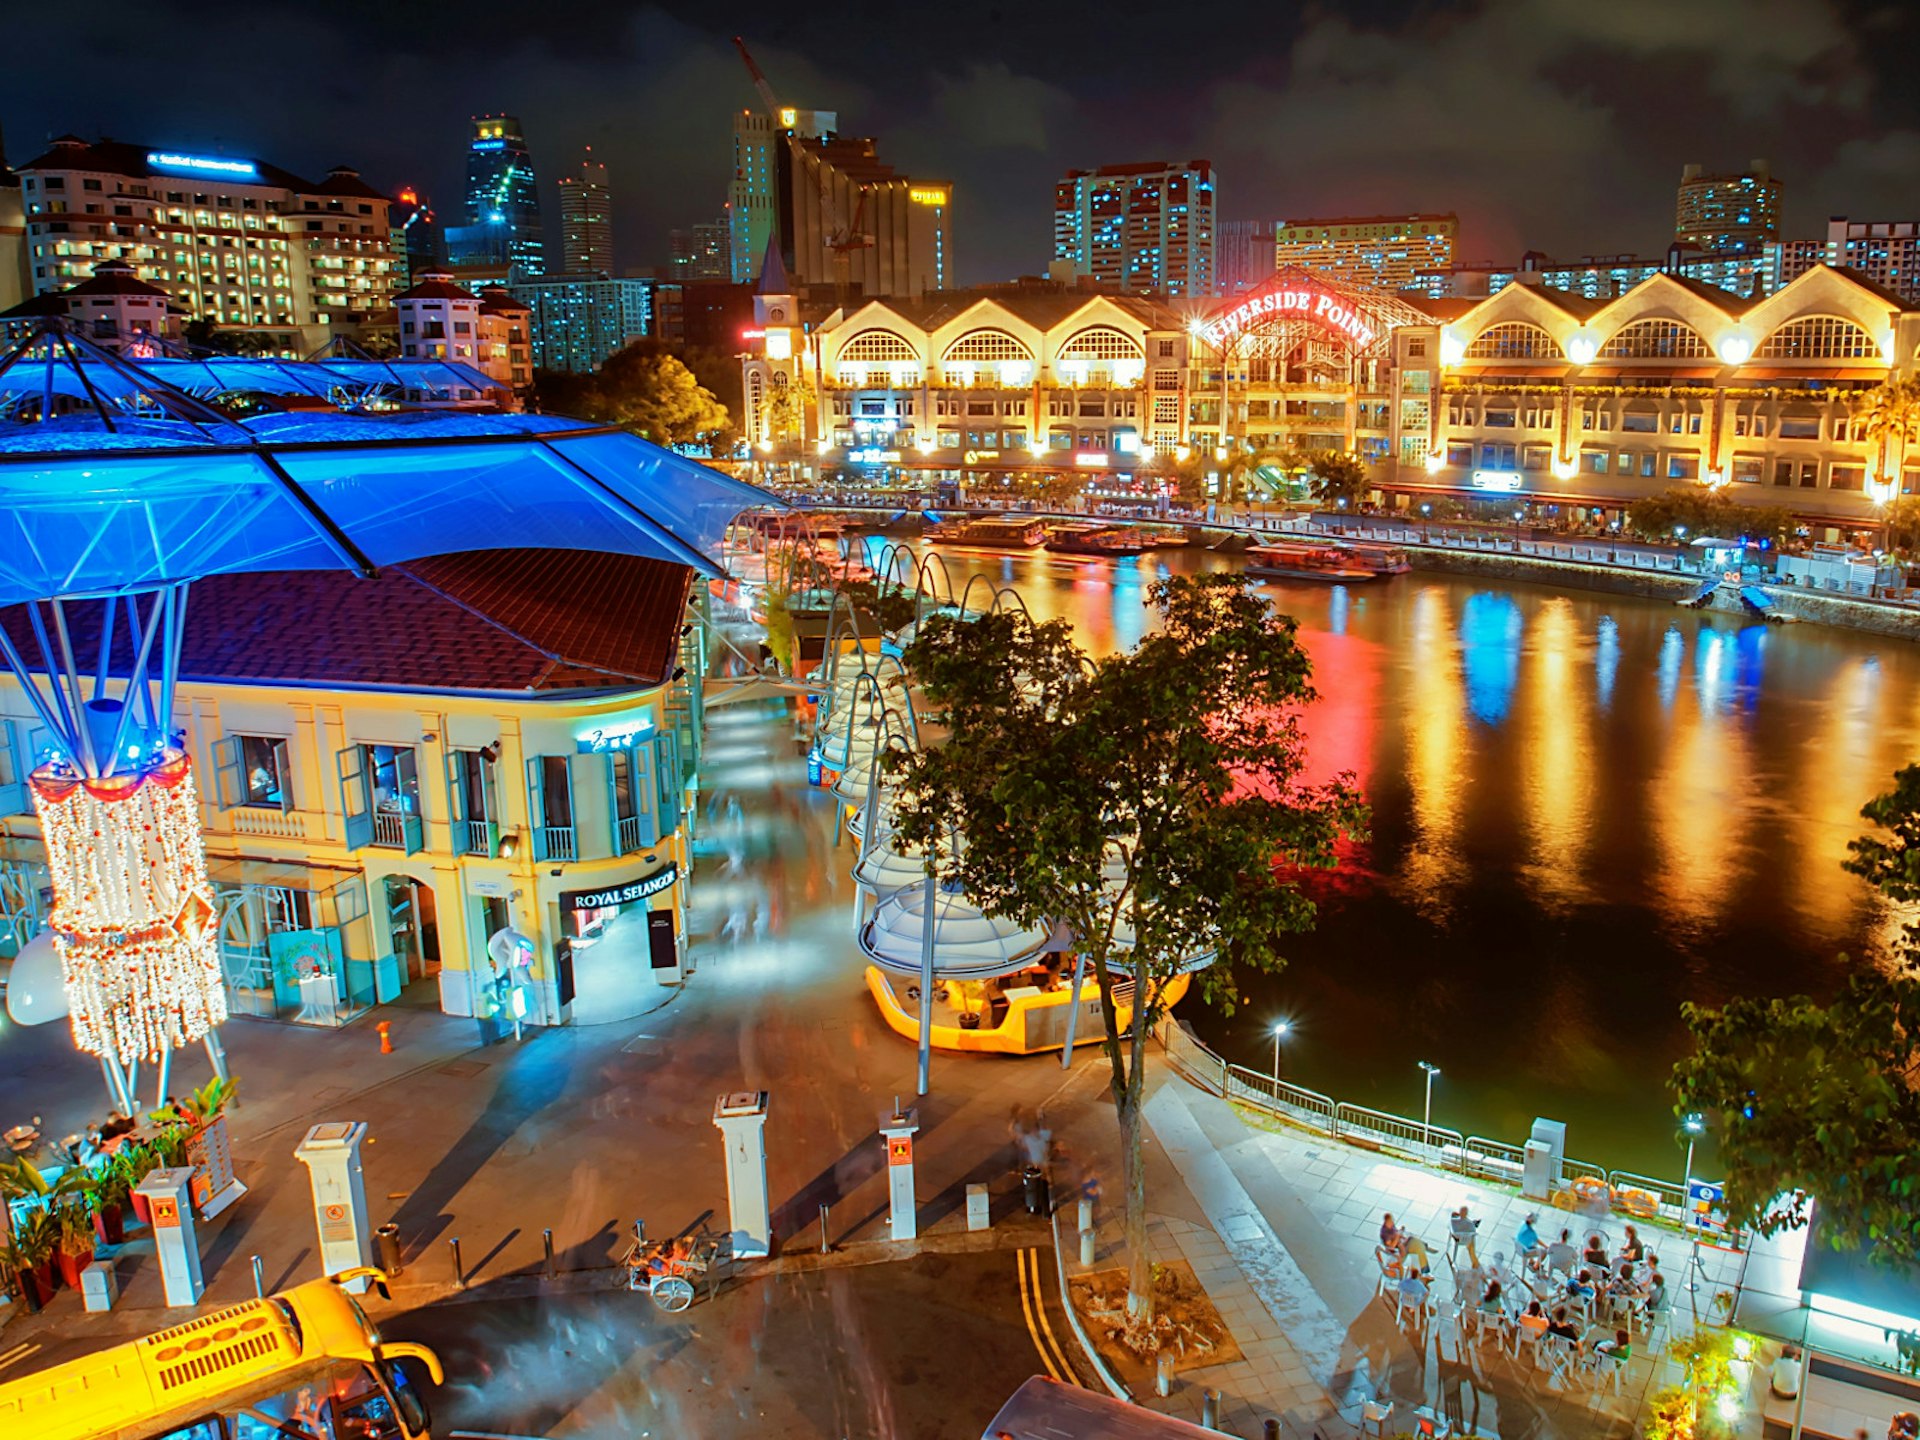 Riverside bars and restaurants at Clarke Quay are popular with tourists and locals alike